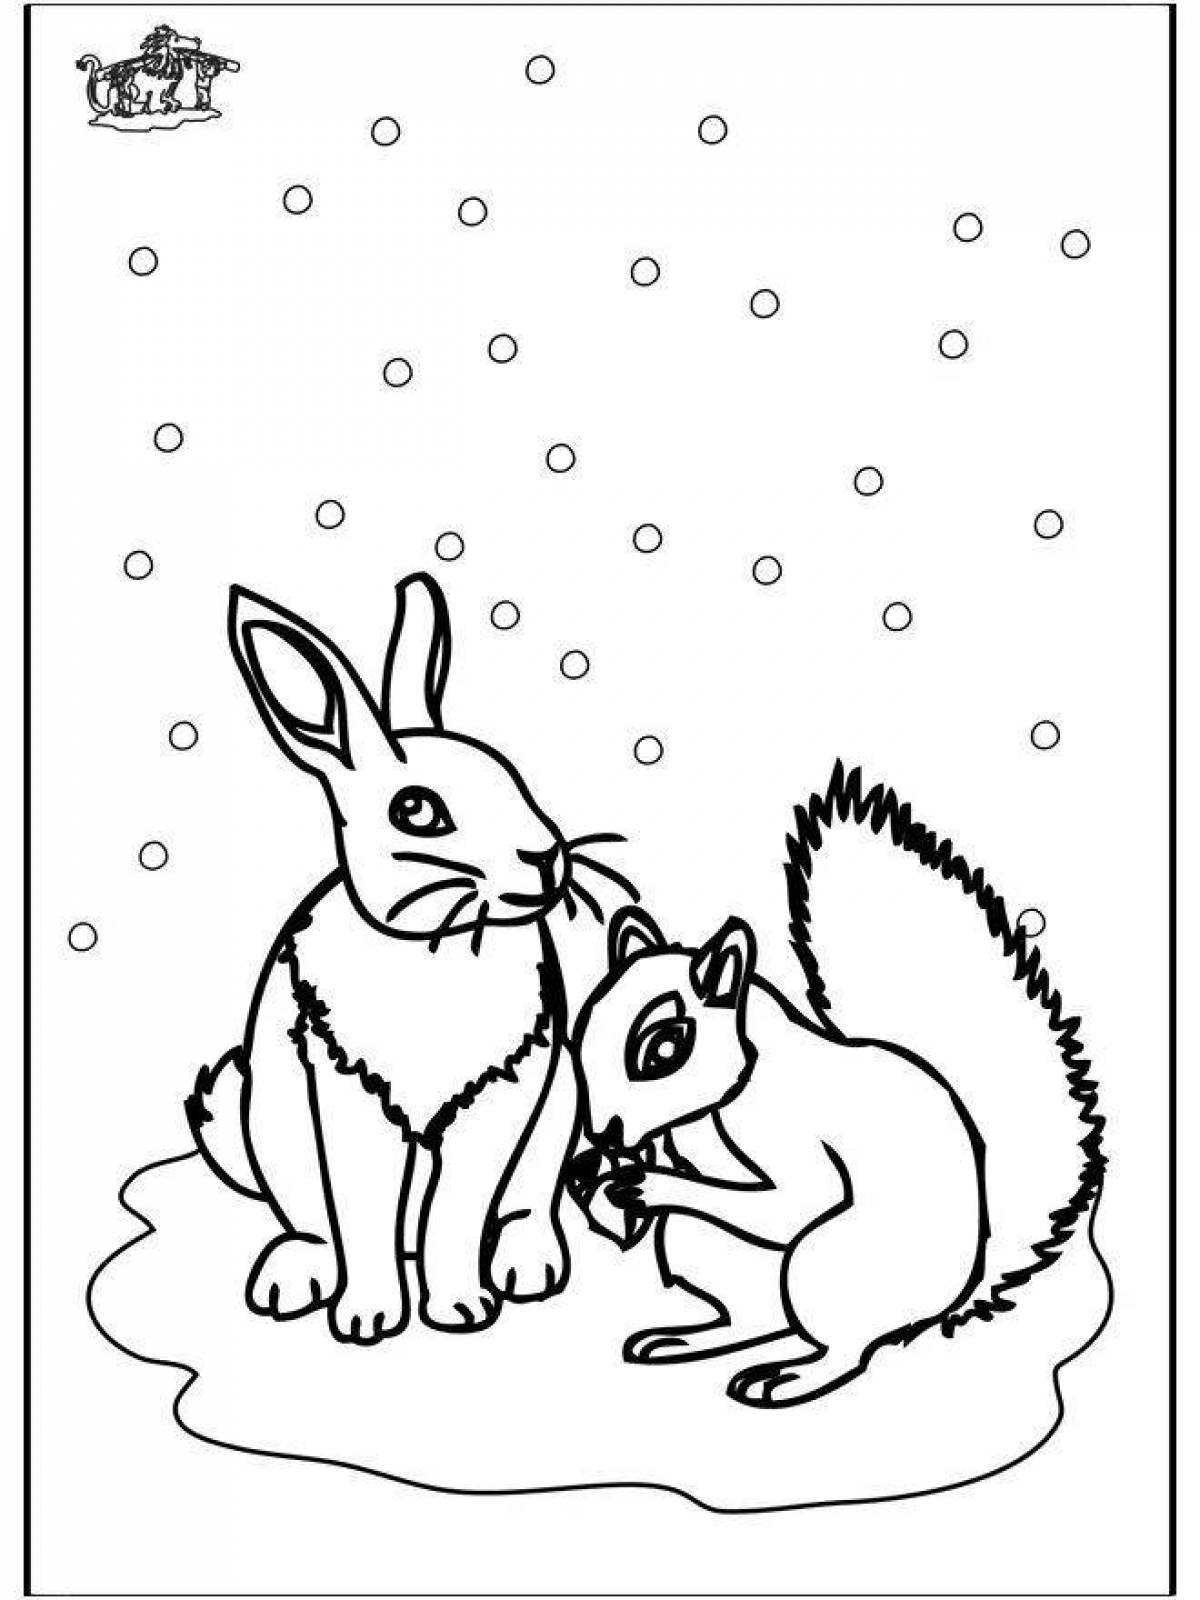 Coloring page playful arctic wolf